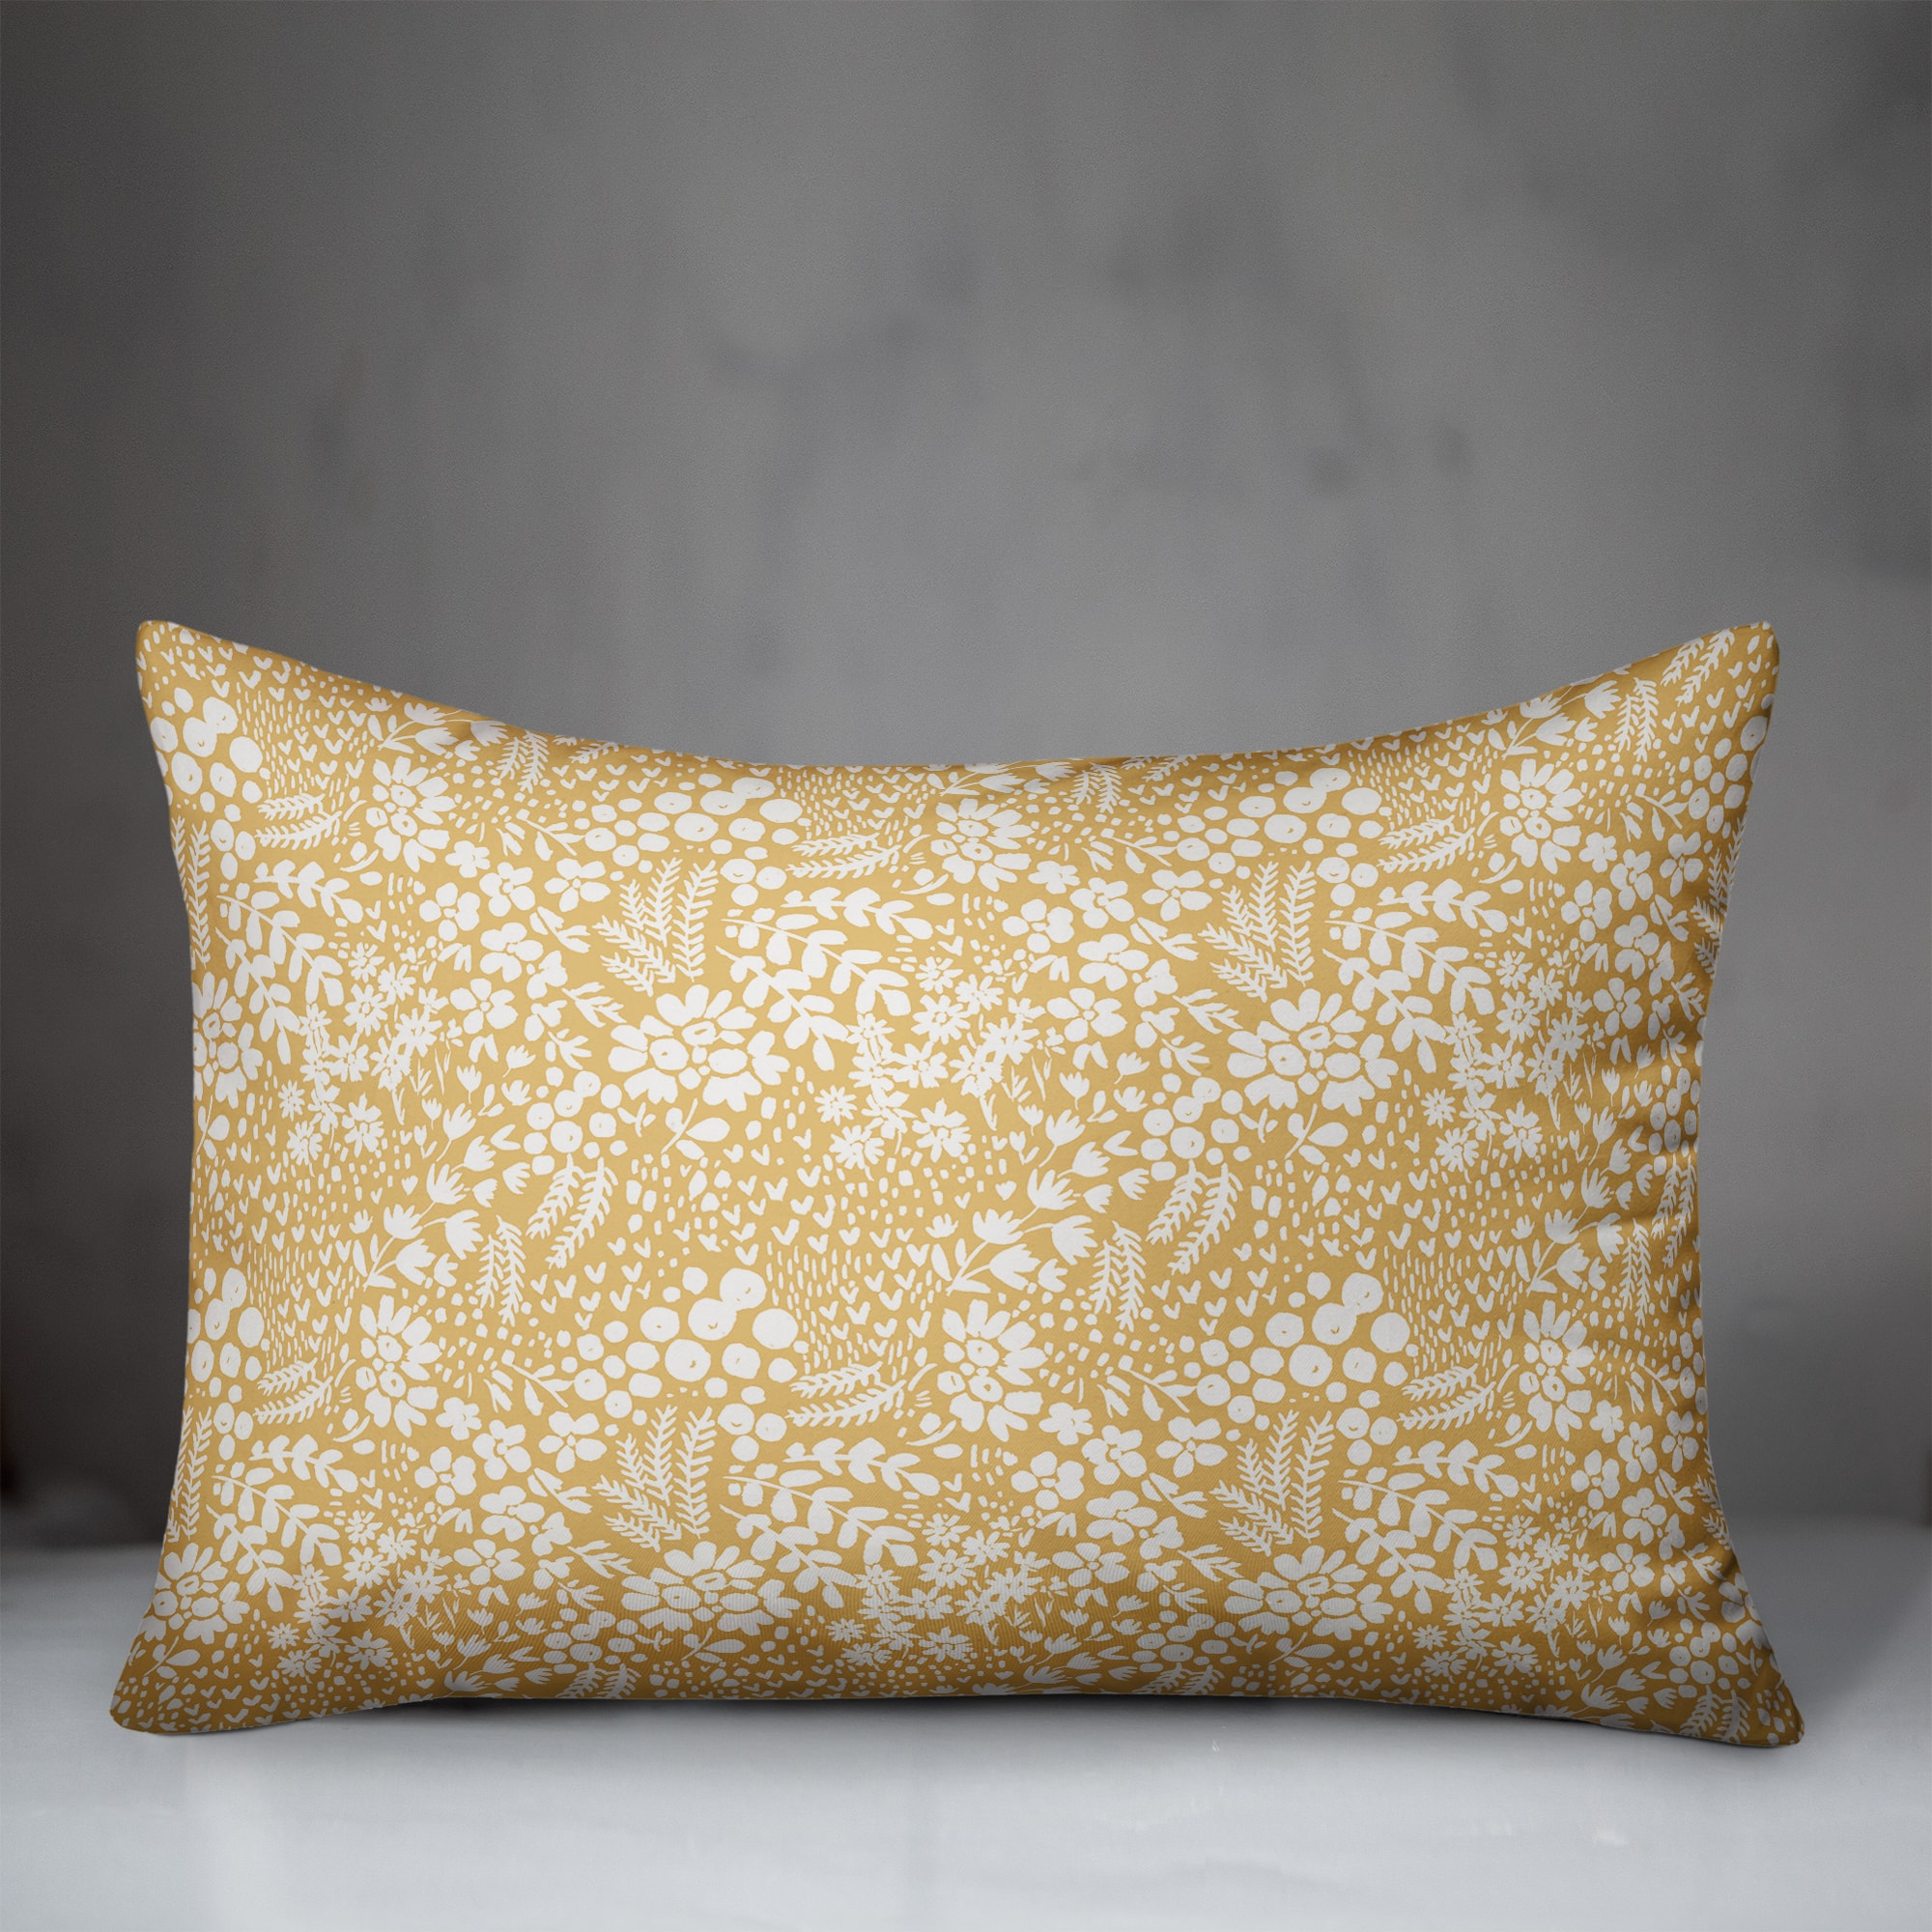 Dainty Floral Throw Pillow